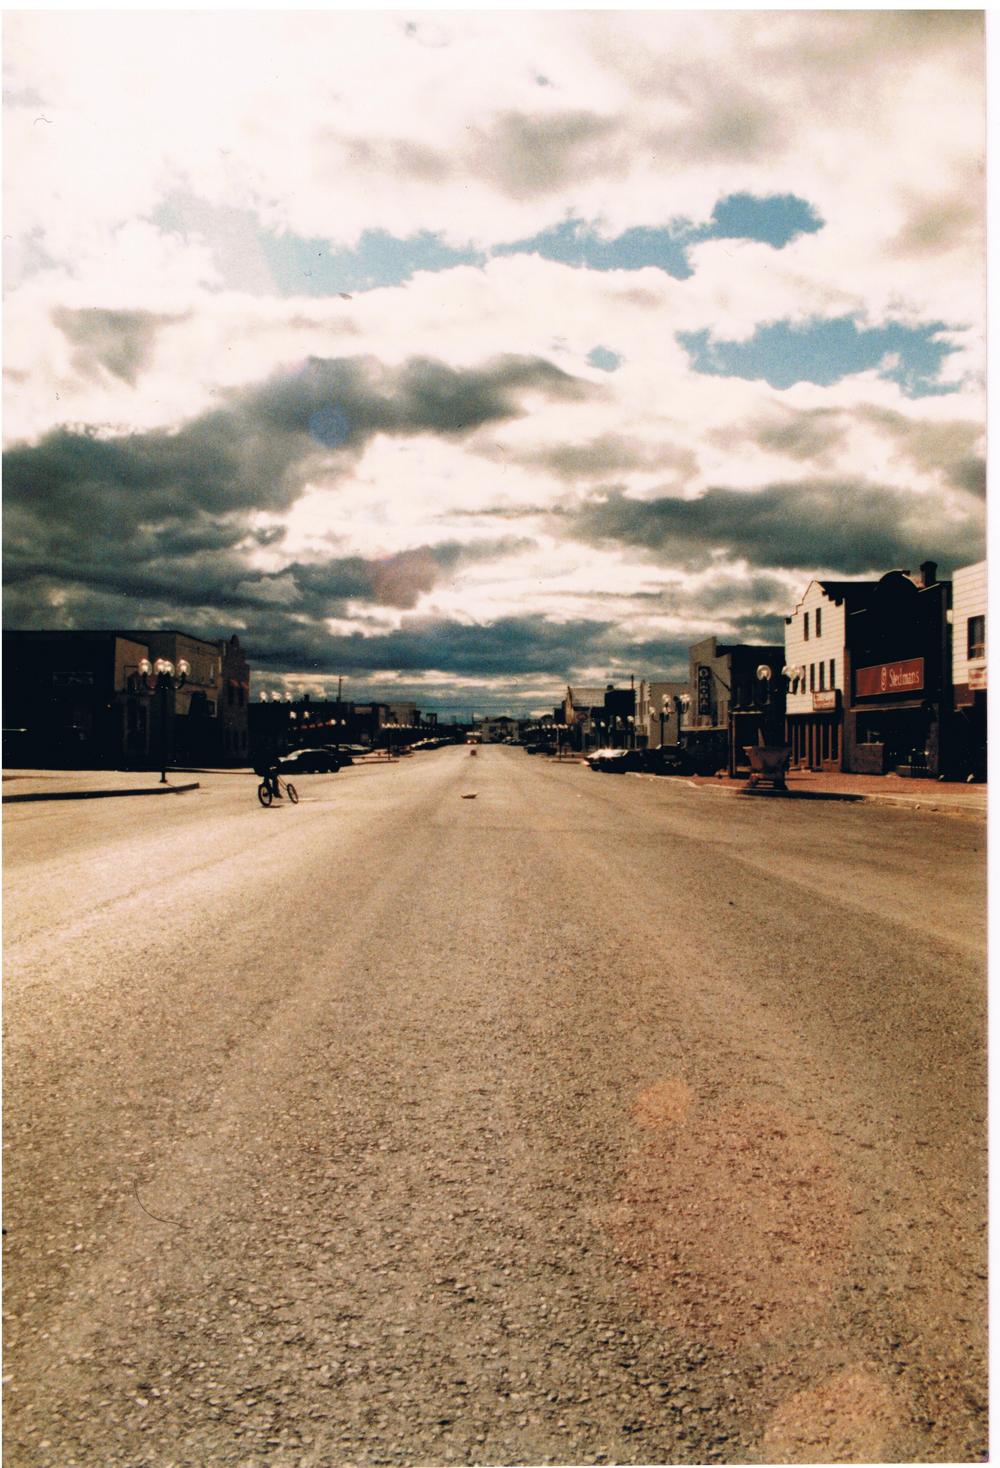 View of the main street of Malartic in the years 1980 to 1990